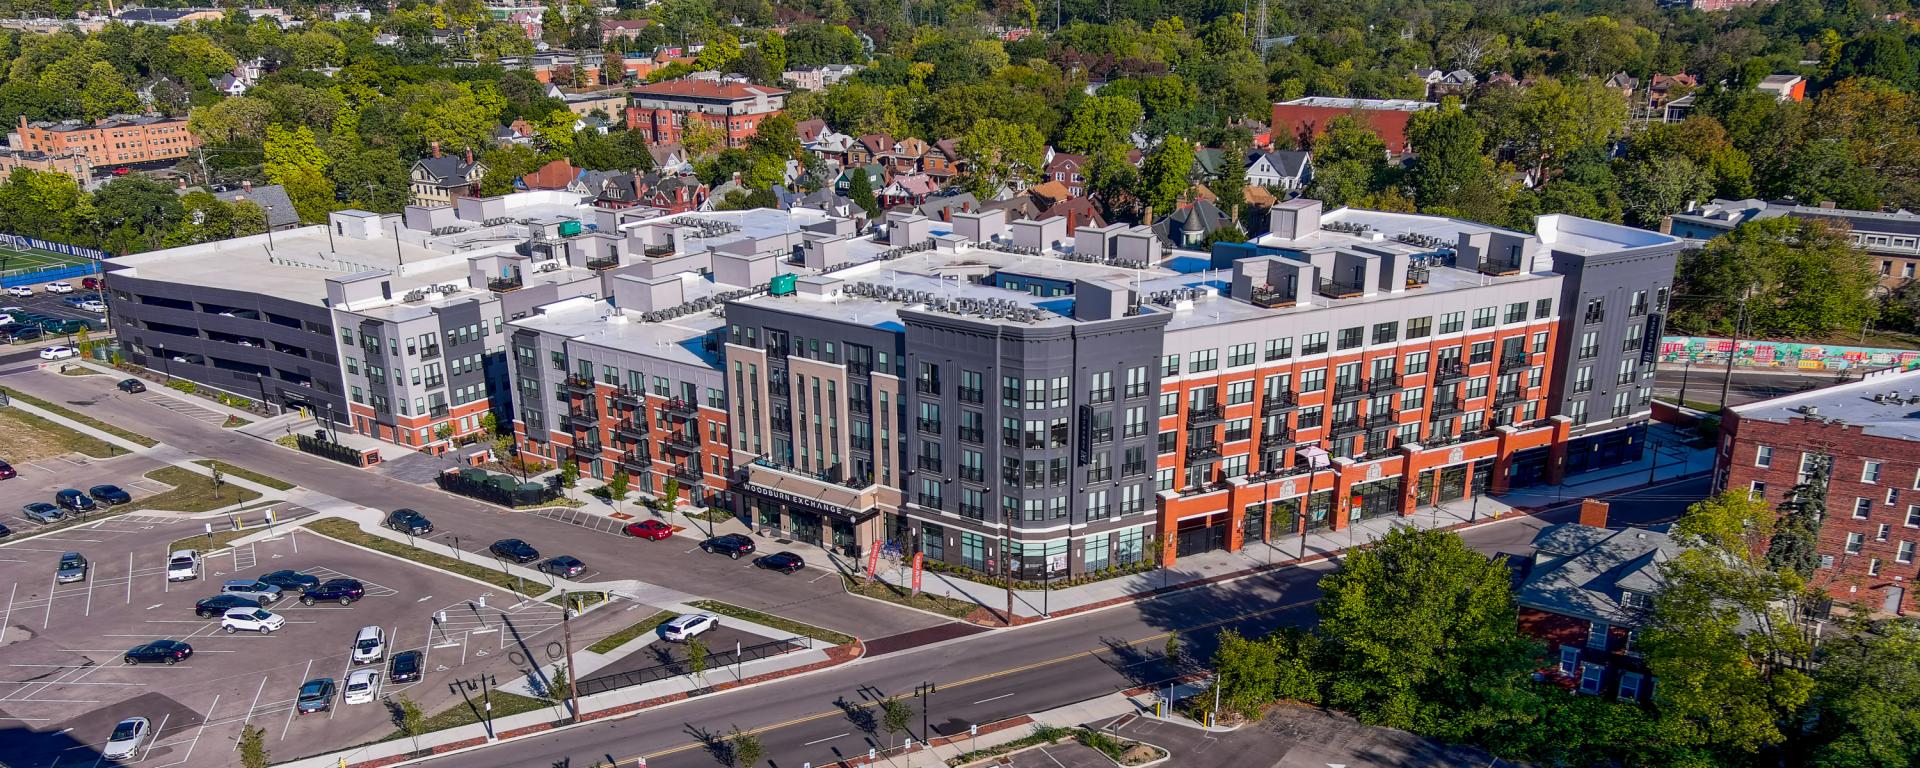 aerial photo of apartment building with parking garage in urban neighborhood